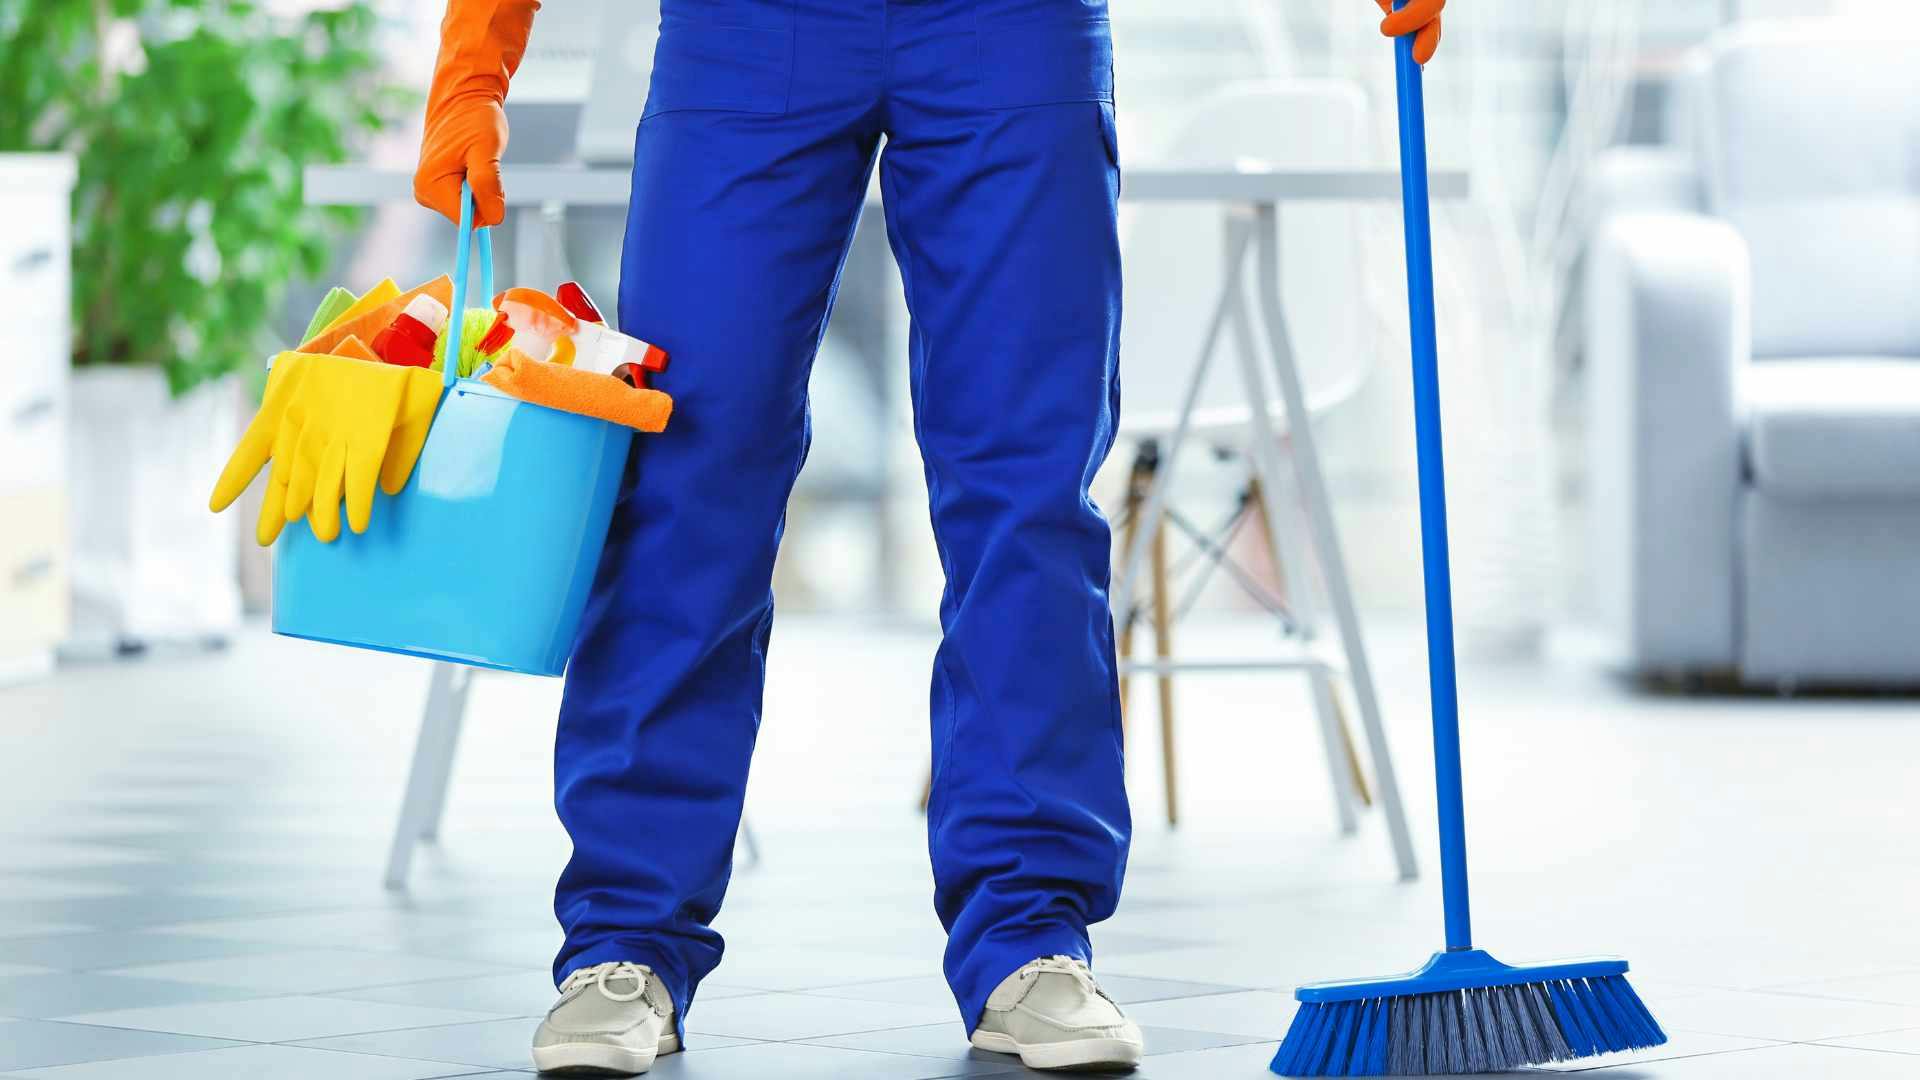 Residential cleaner holding a cleaning caddy in one hand and then a broom in the other